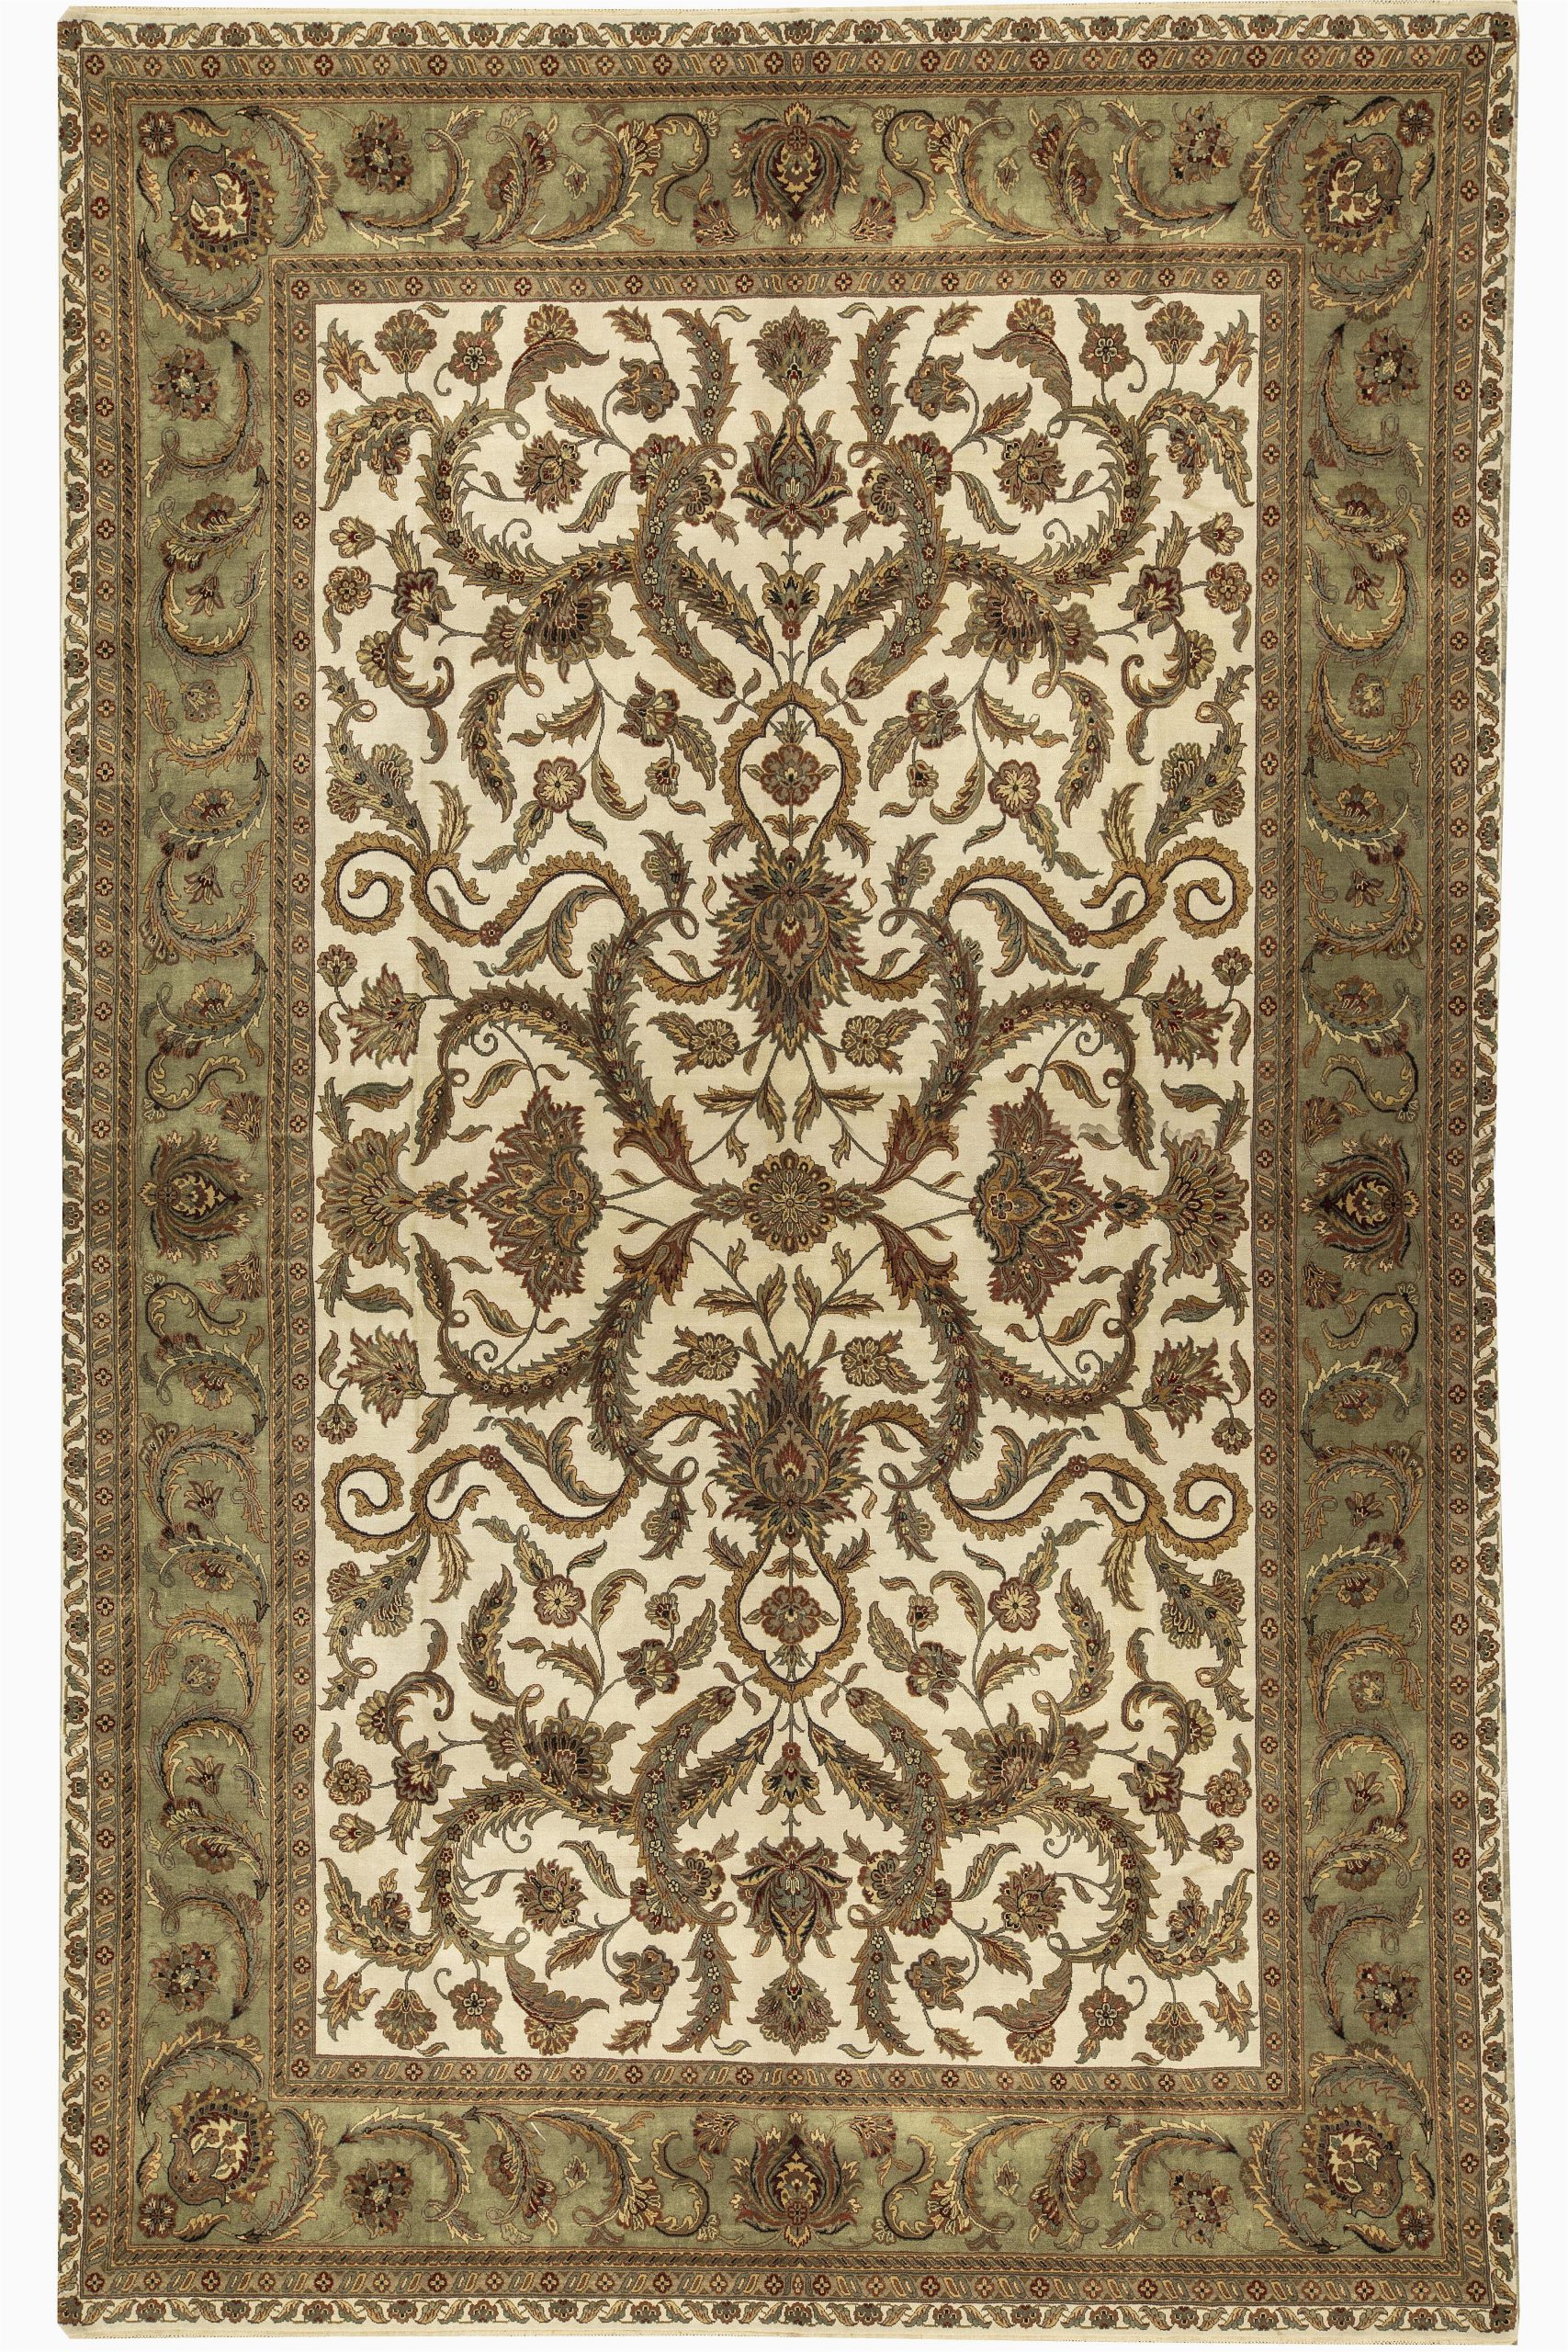 10 X 18 area Rug E Of A Kind Trinity Handwoven 12 1" X 18 9" Wool Brown Ivory area Rug